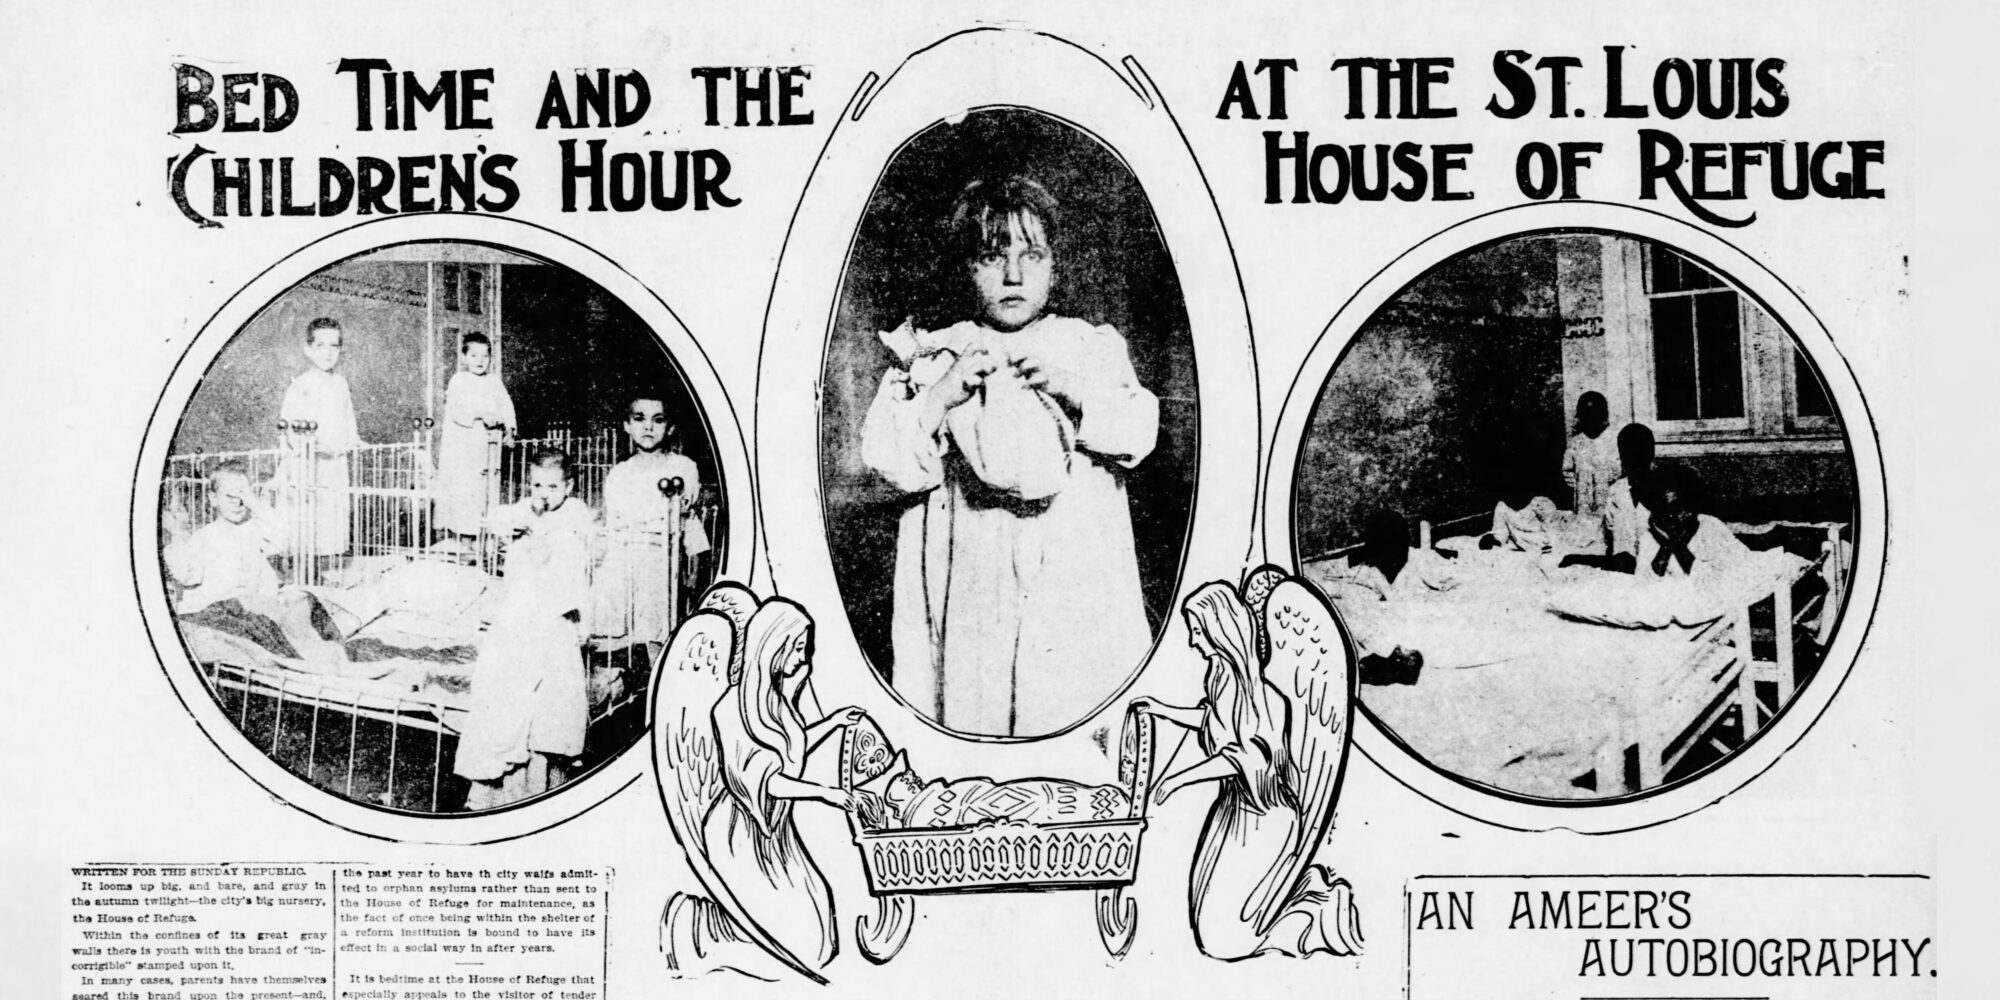 Clipping from the November 3rd, 1901 edition of the St. Louis Republic titled "Bed Time and the Children's Hour at the St. Louis House of Refuge." The image contains vignettes of children wearing nightgowns in beds and a drawing of two angels rocking a bassinet.